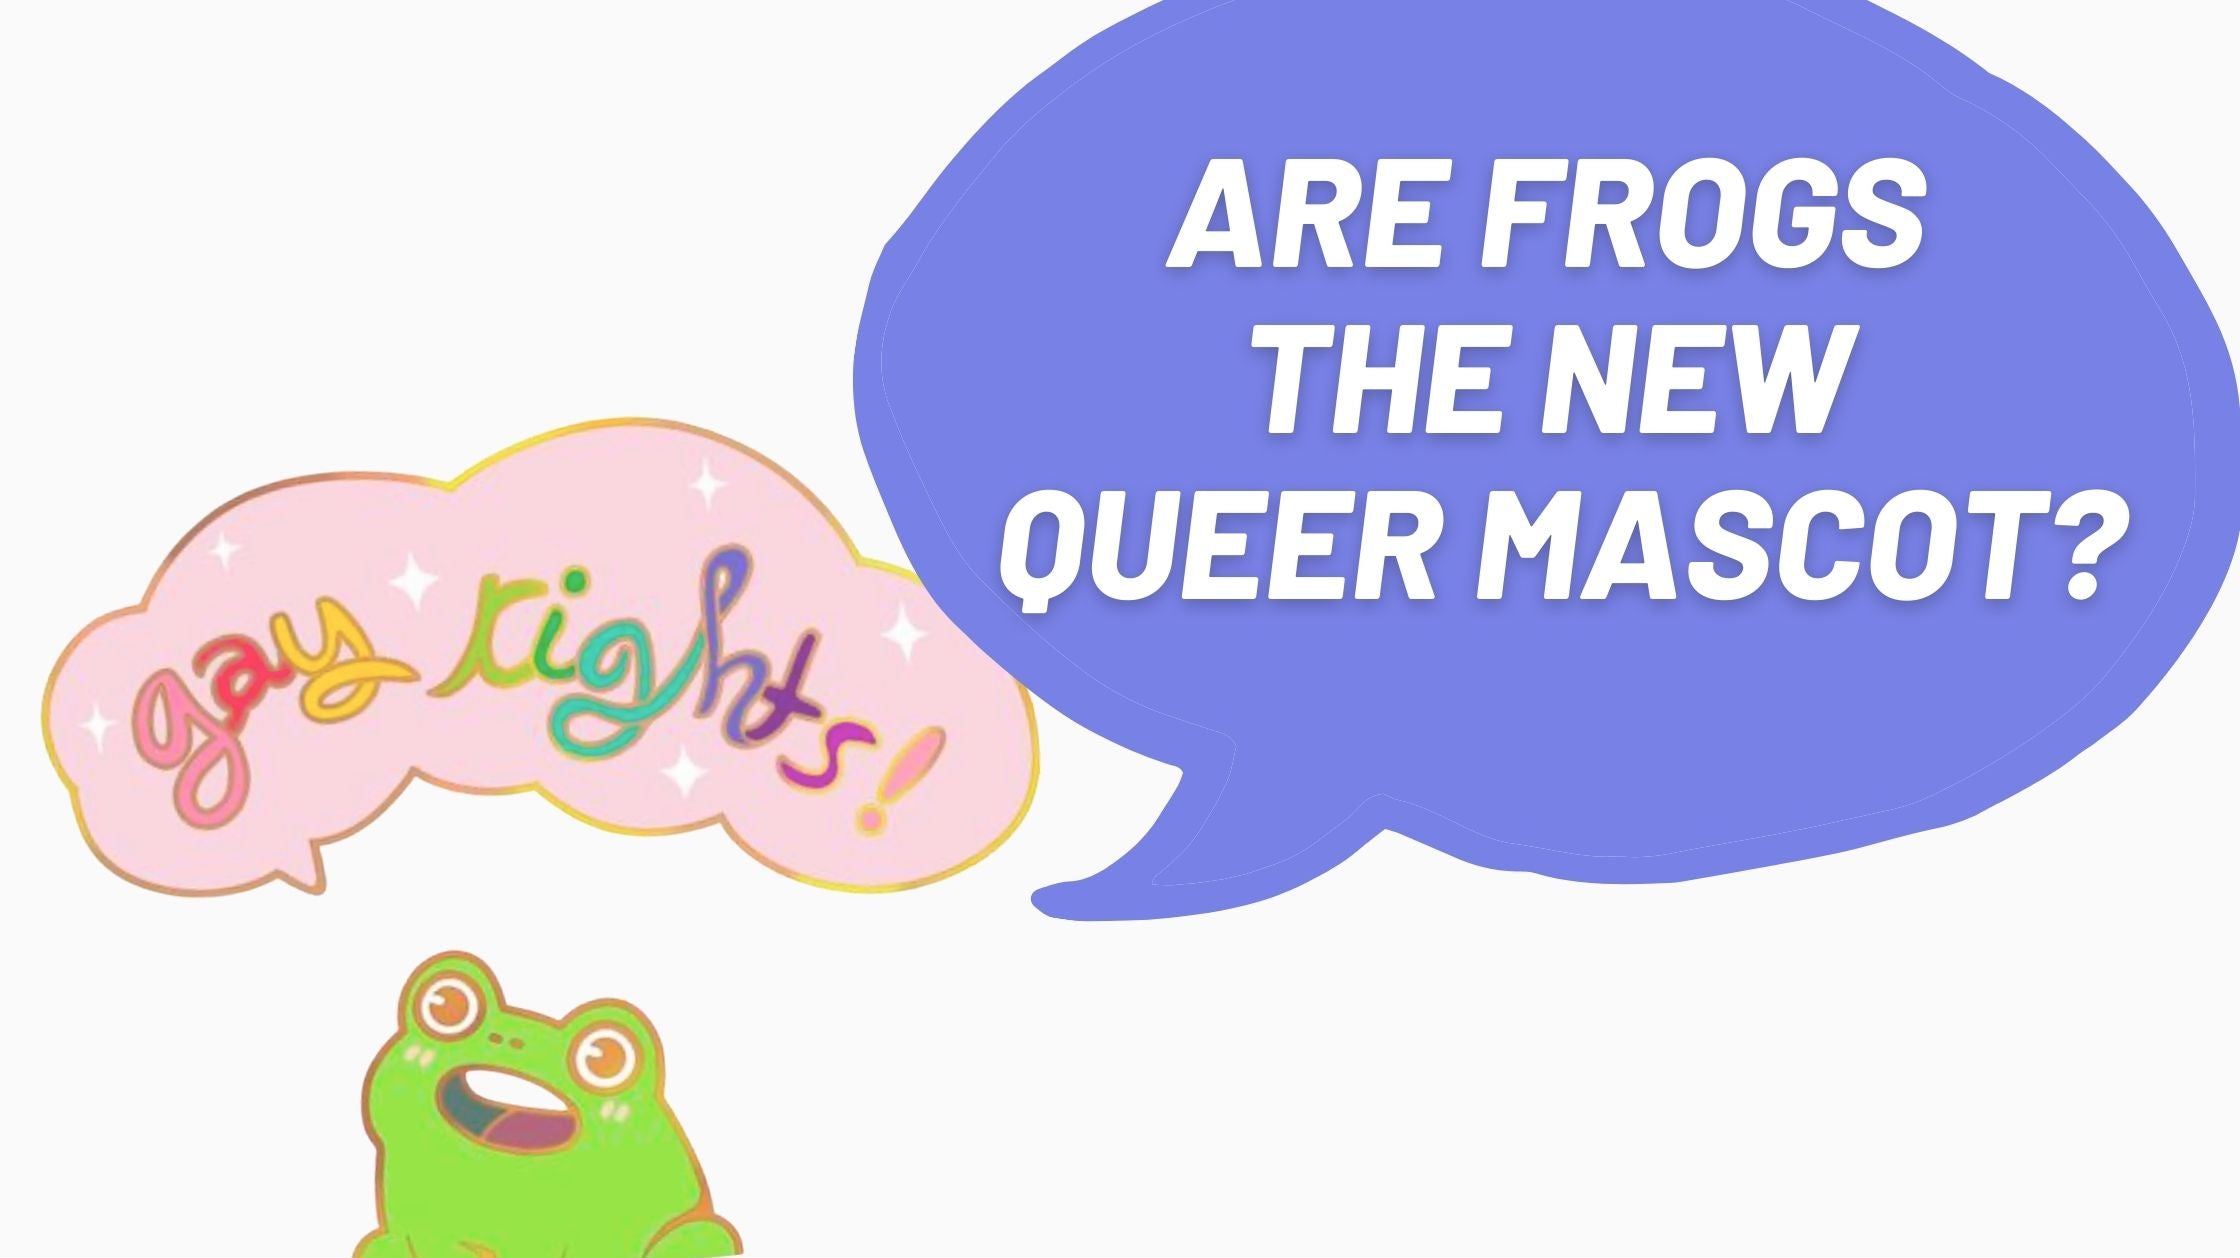 Frogs: The New Queer Mascot?